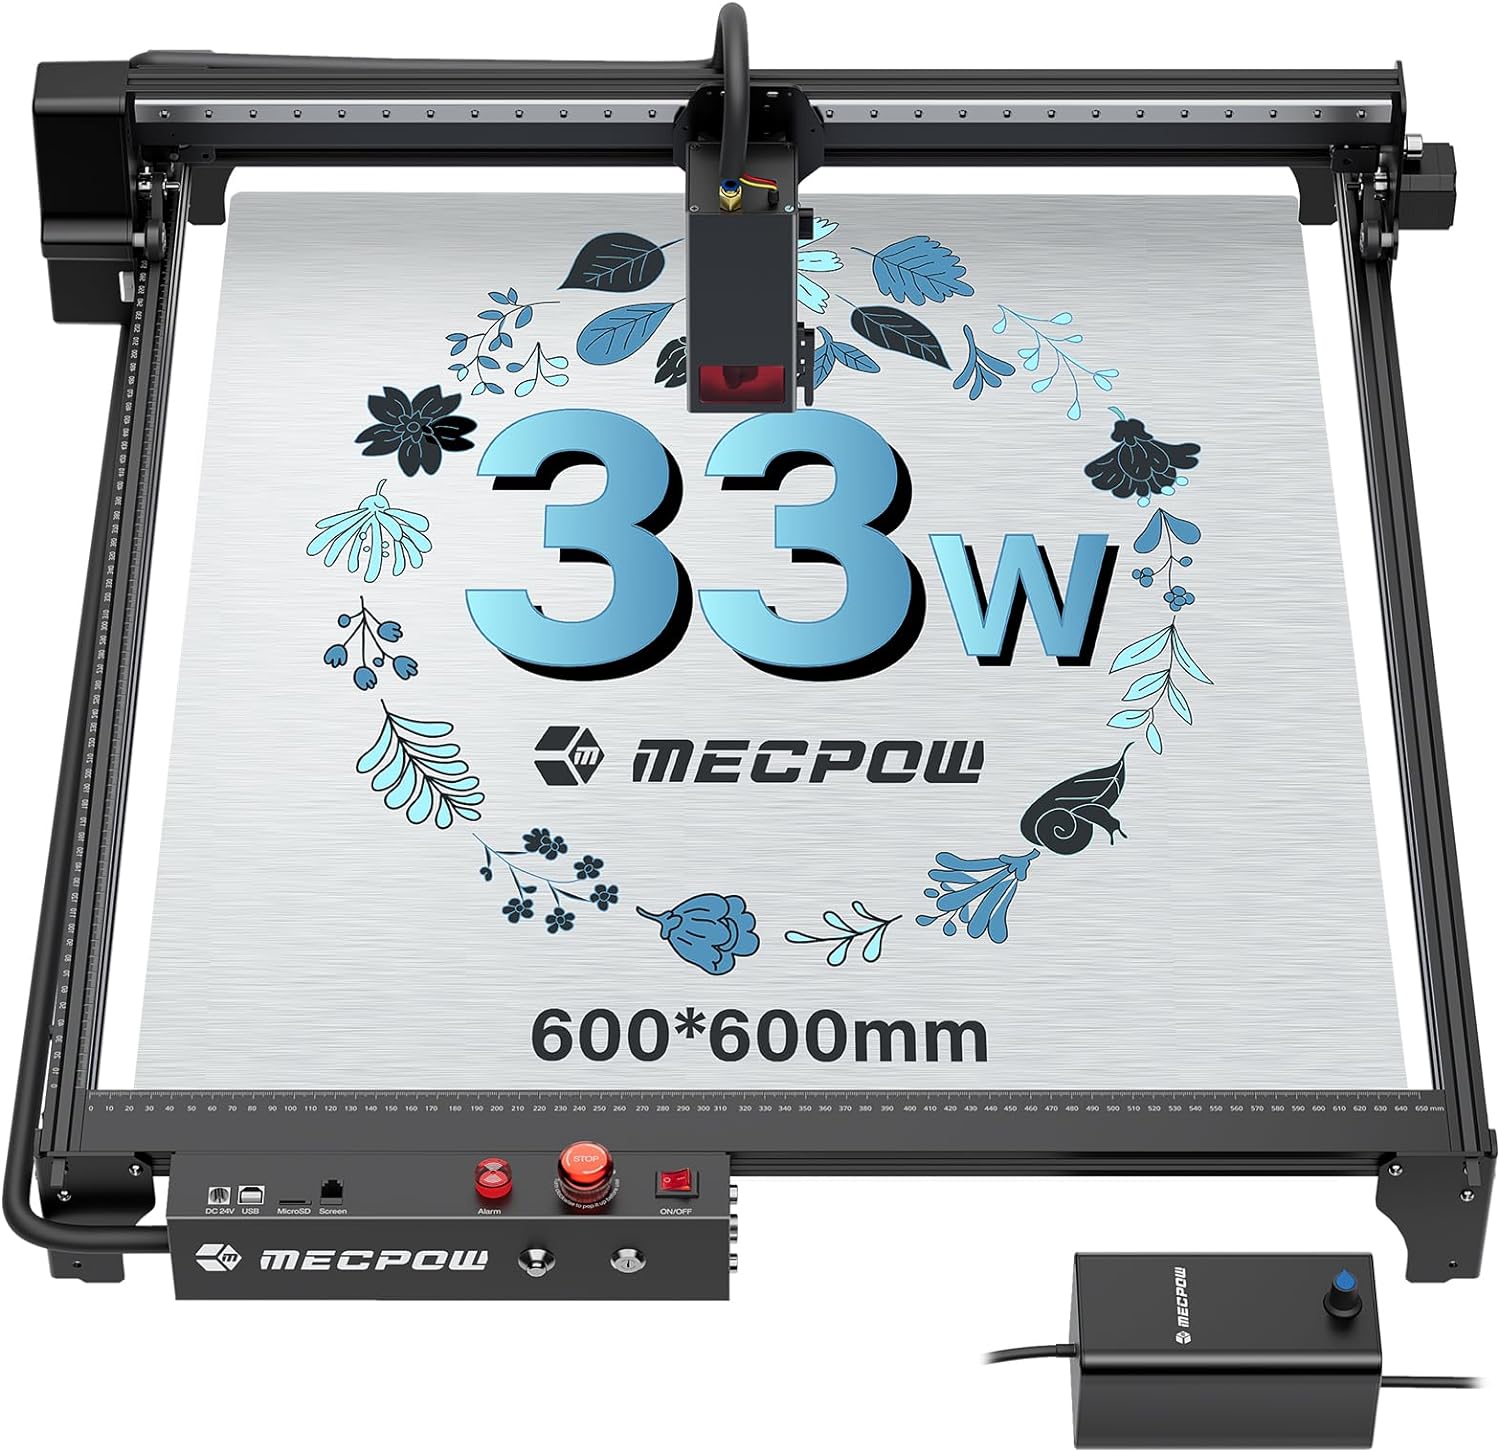 Mecpow X5 Pro Laser Engraver w/Air Assist, 192W Laser Cutter, 33W Output Laser Engraving Cutting Machine, Laser Engraver for Wood and Metal, CNC Machine for DIY Gift Woodworking, 23.6x23.6" Work Area